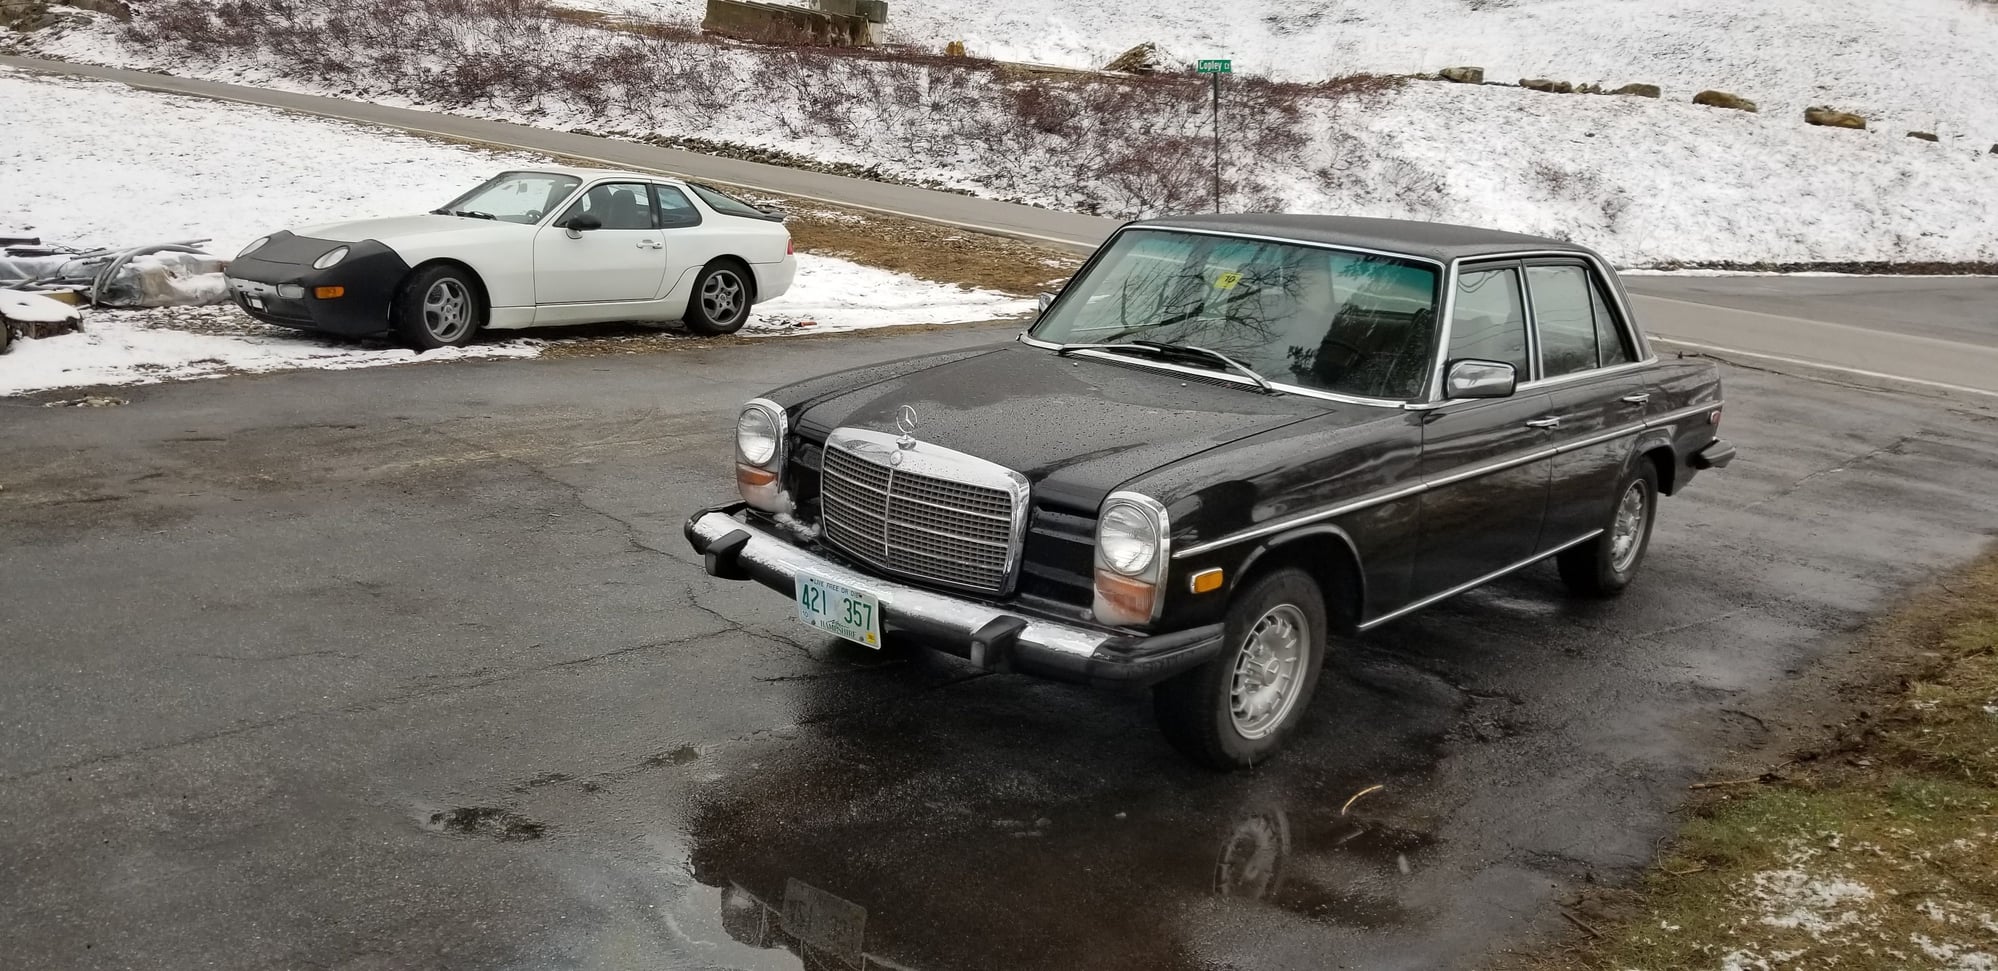 1975 Mercedes-Benz 240D - 1975 240D nice condition in storage 15 years - Used - VIN WDB11511710076563 - 93,000 Miles - 4 cyl - 2WD - Manual - Sedan - Black - Auburn, NH 03032, United States